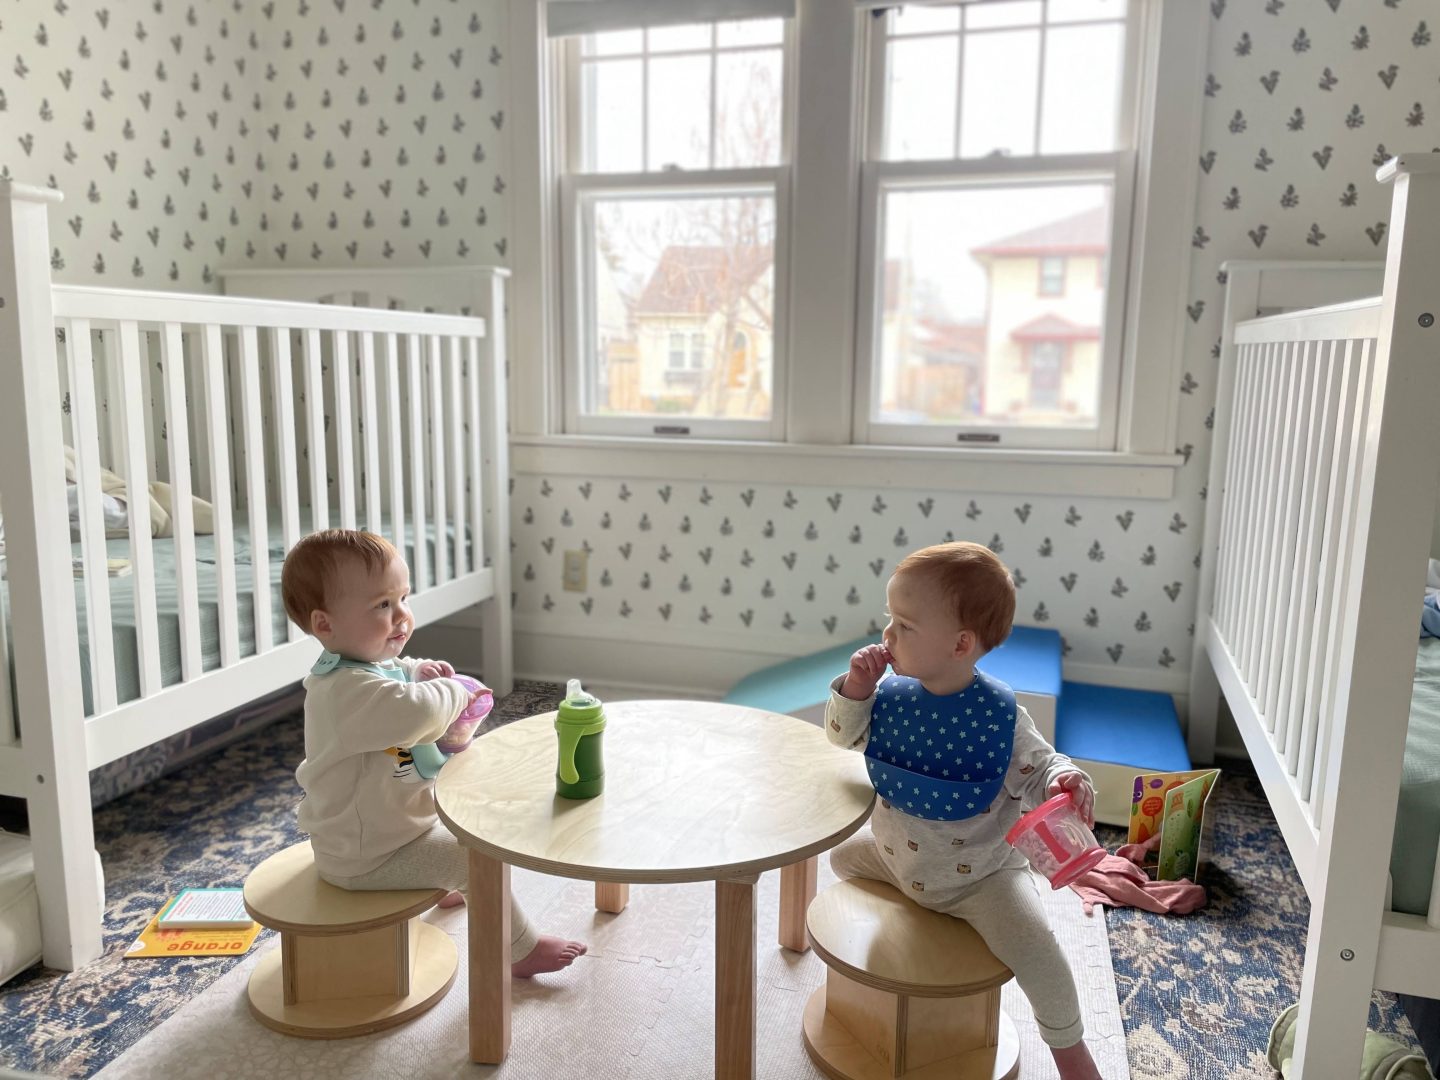 Two toddlers sitting on Magda stools at a low table in their bedroom with two white cribs on either side of the room. They are wearing bibs and having a snack looking at each other.